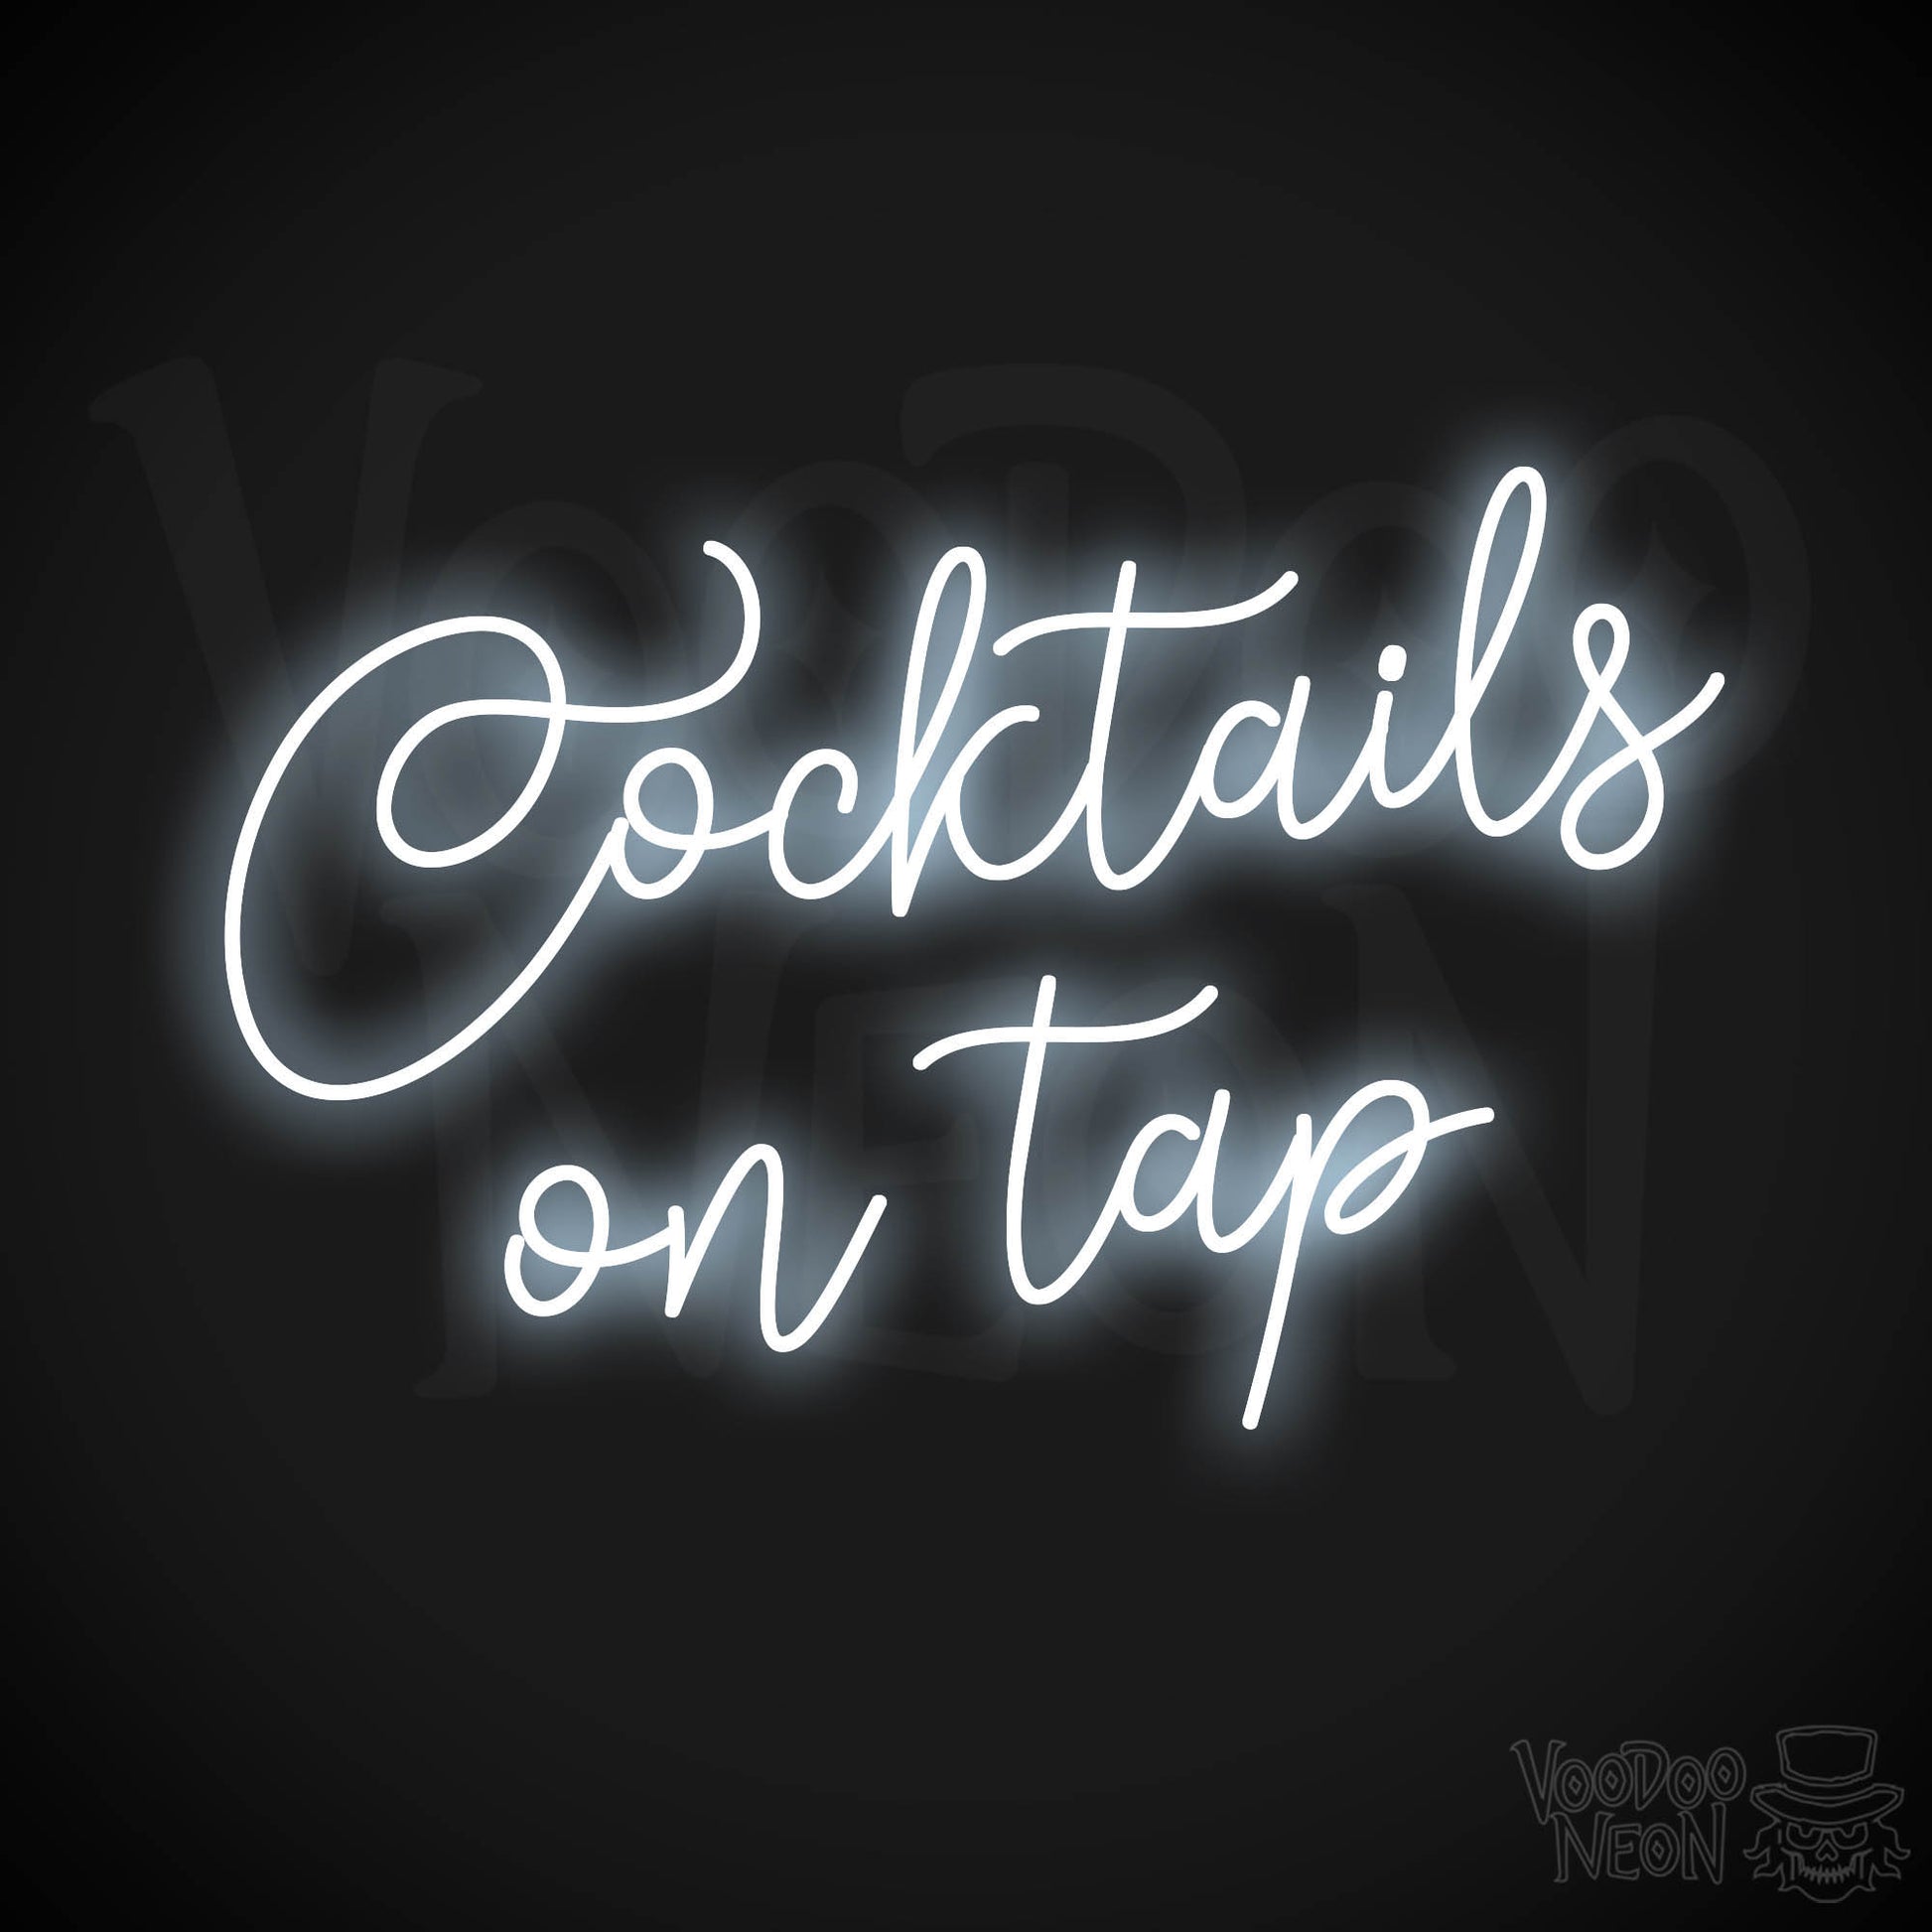 Cocktails On Tap LED Neon - Cool White